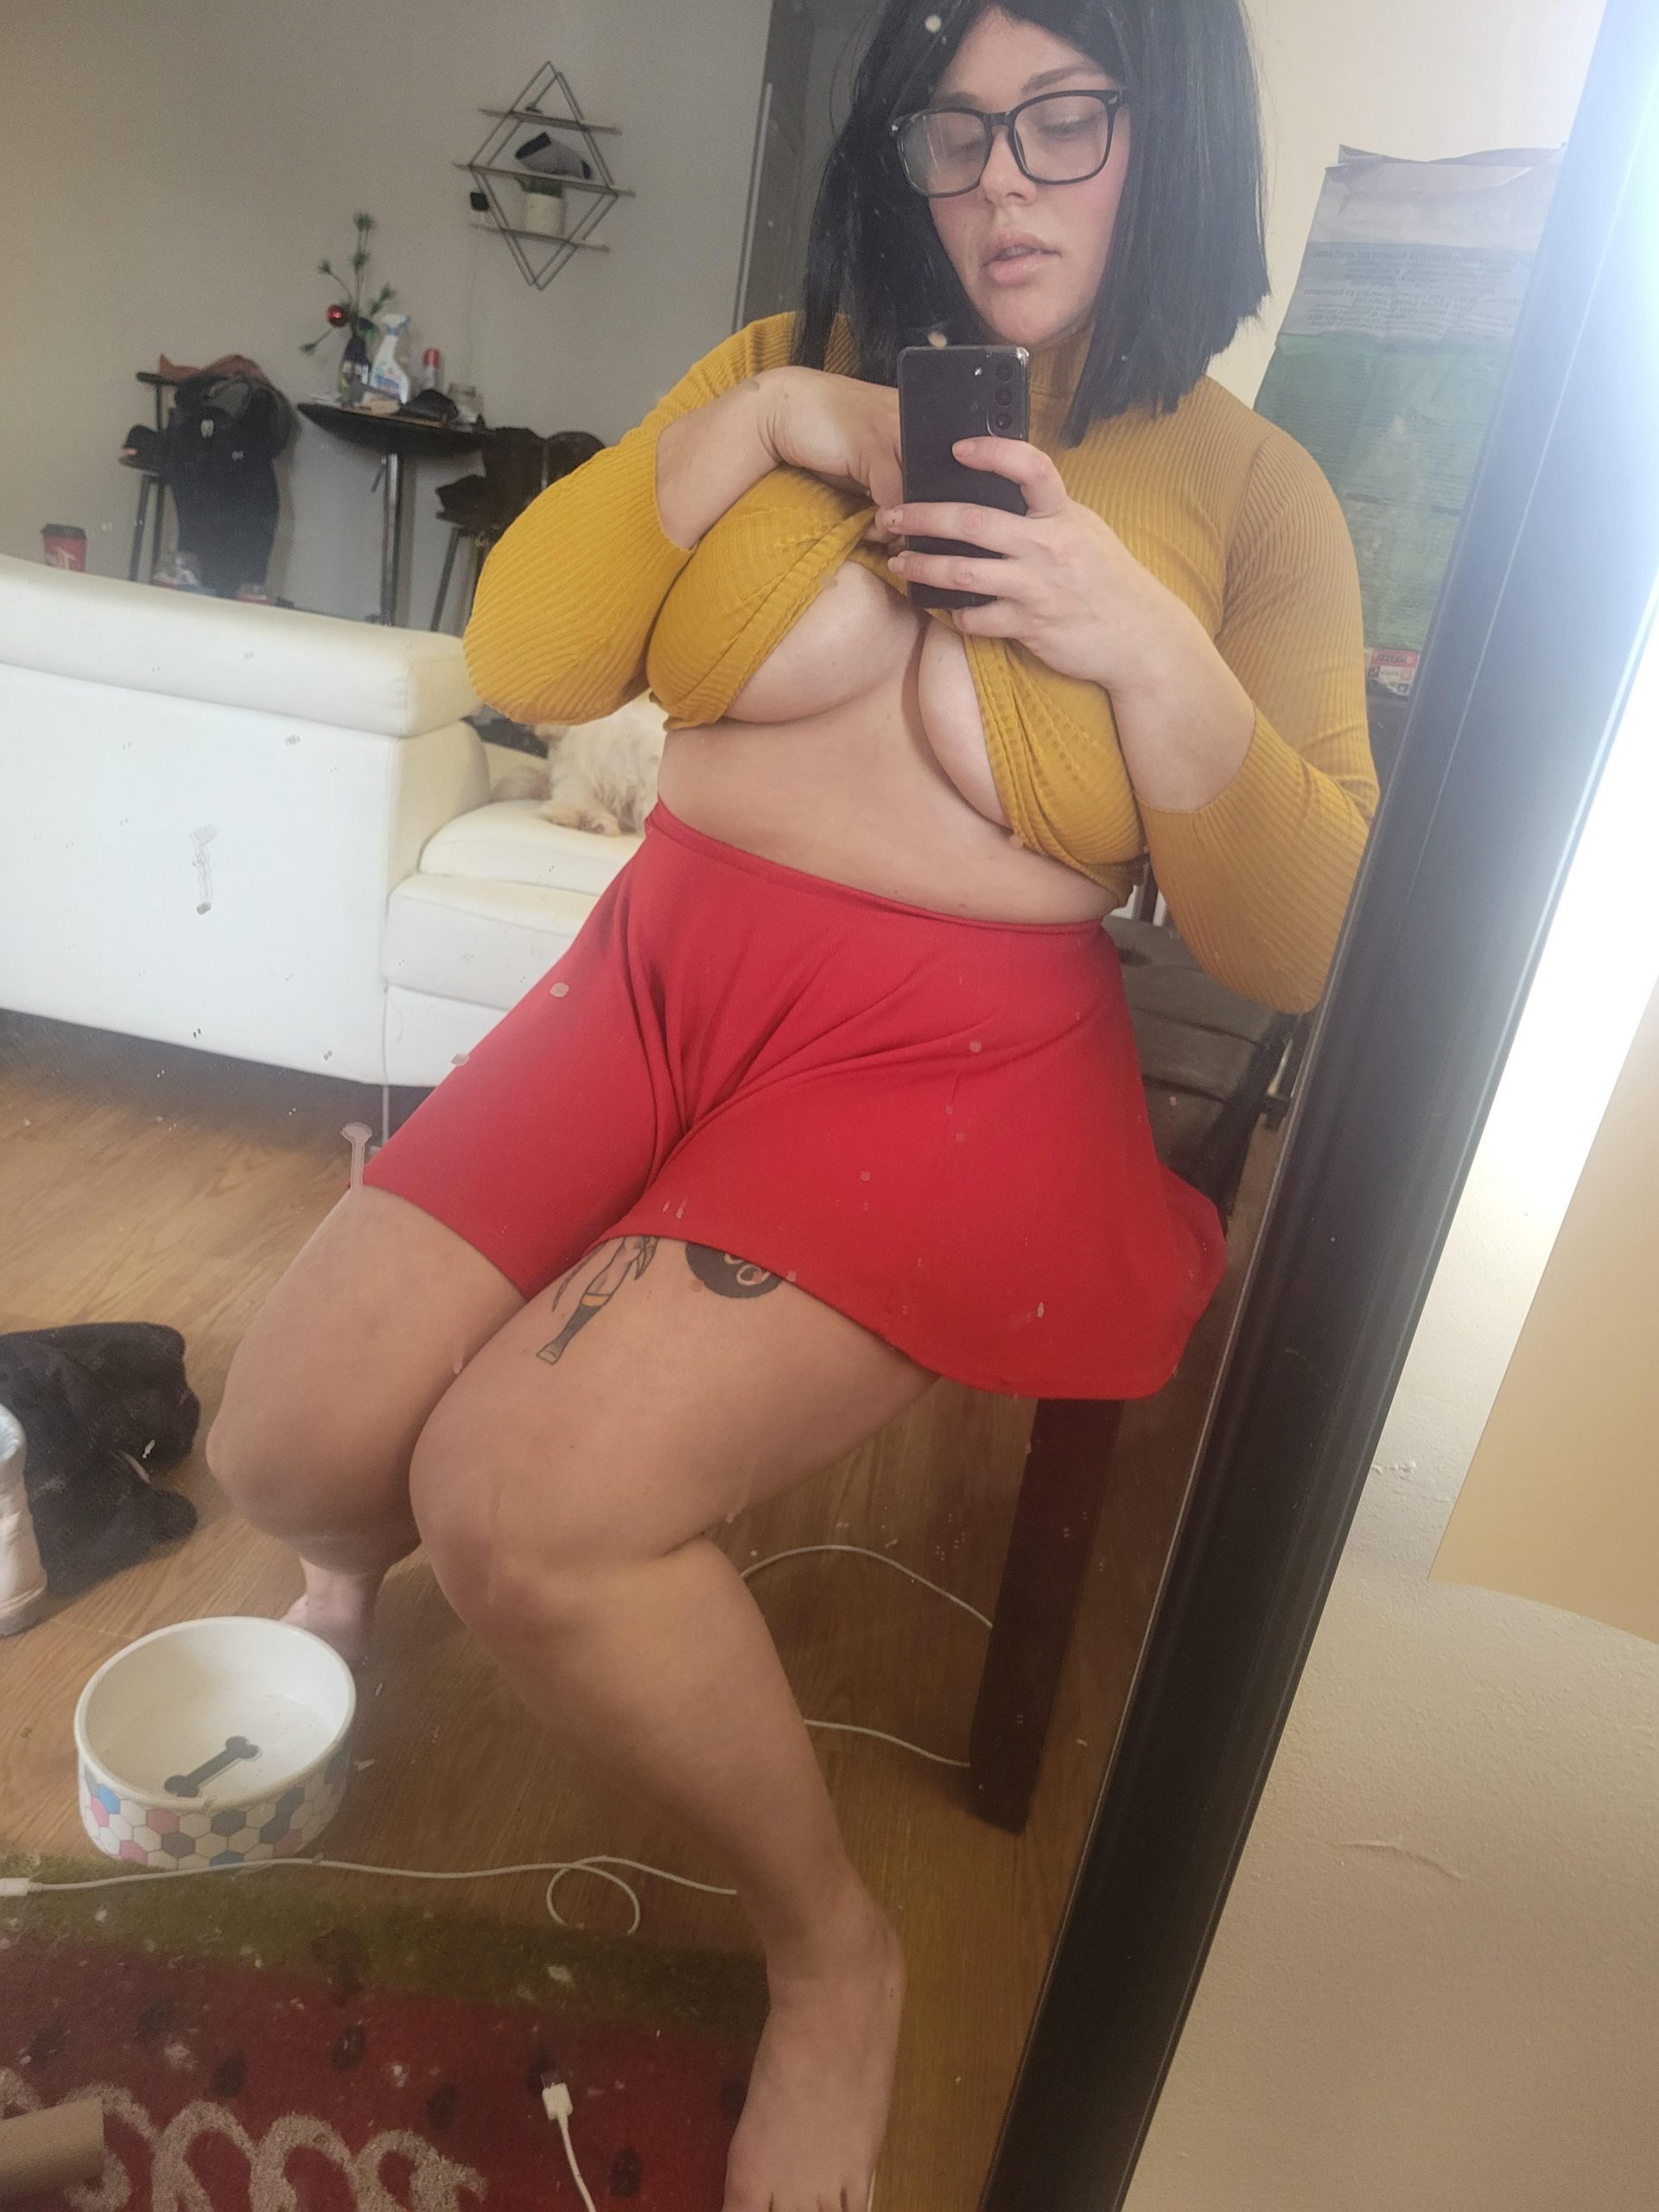 NSFW Velma Dinkley From Scooby Doo By @musclegoddess